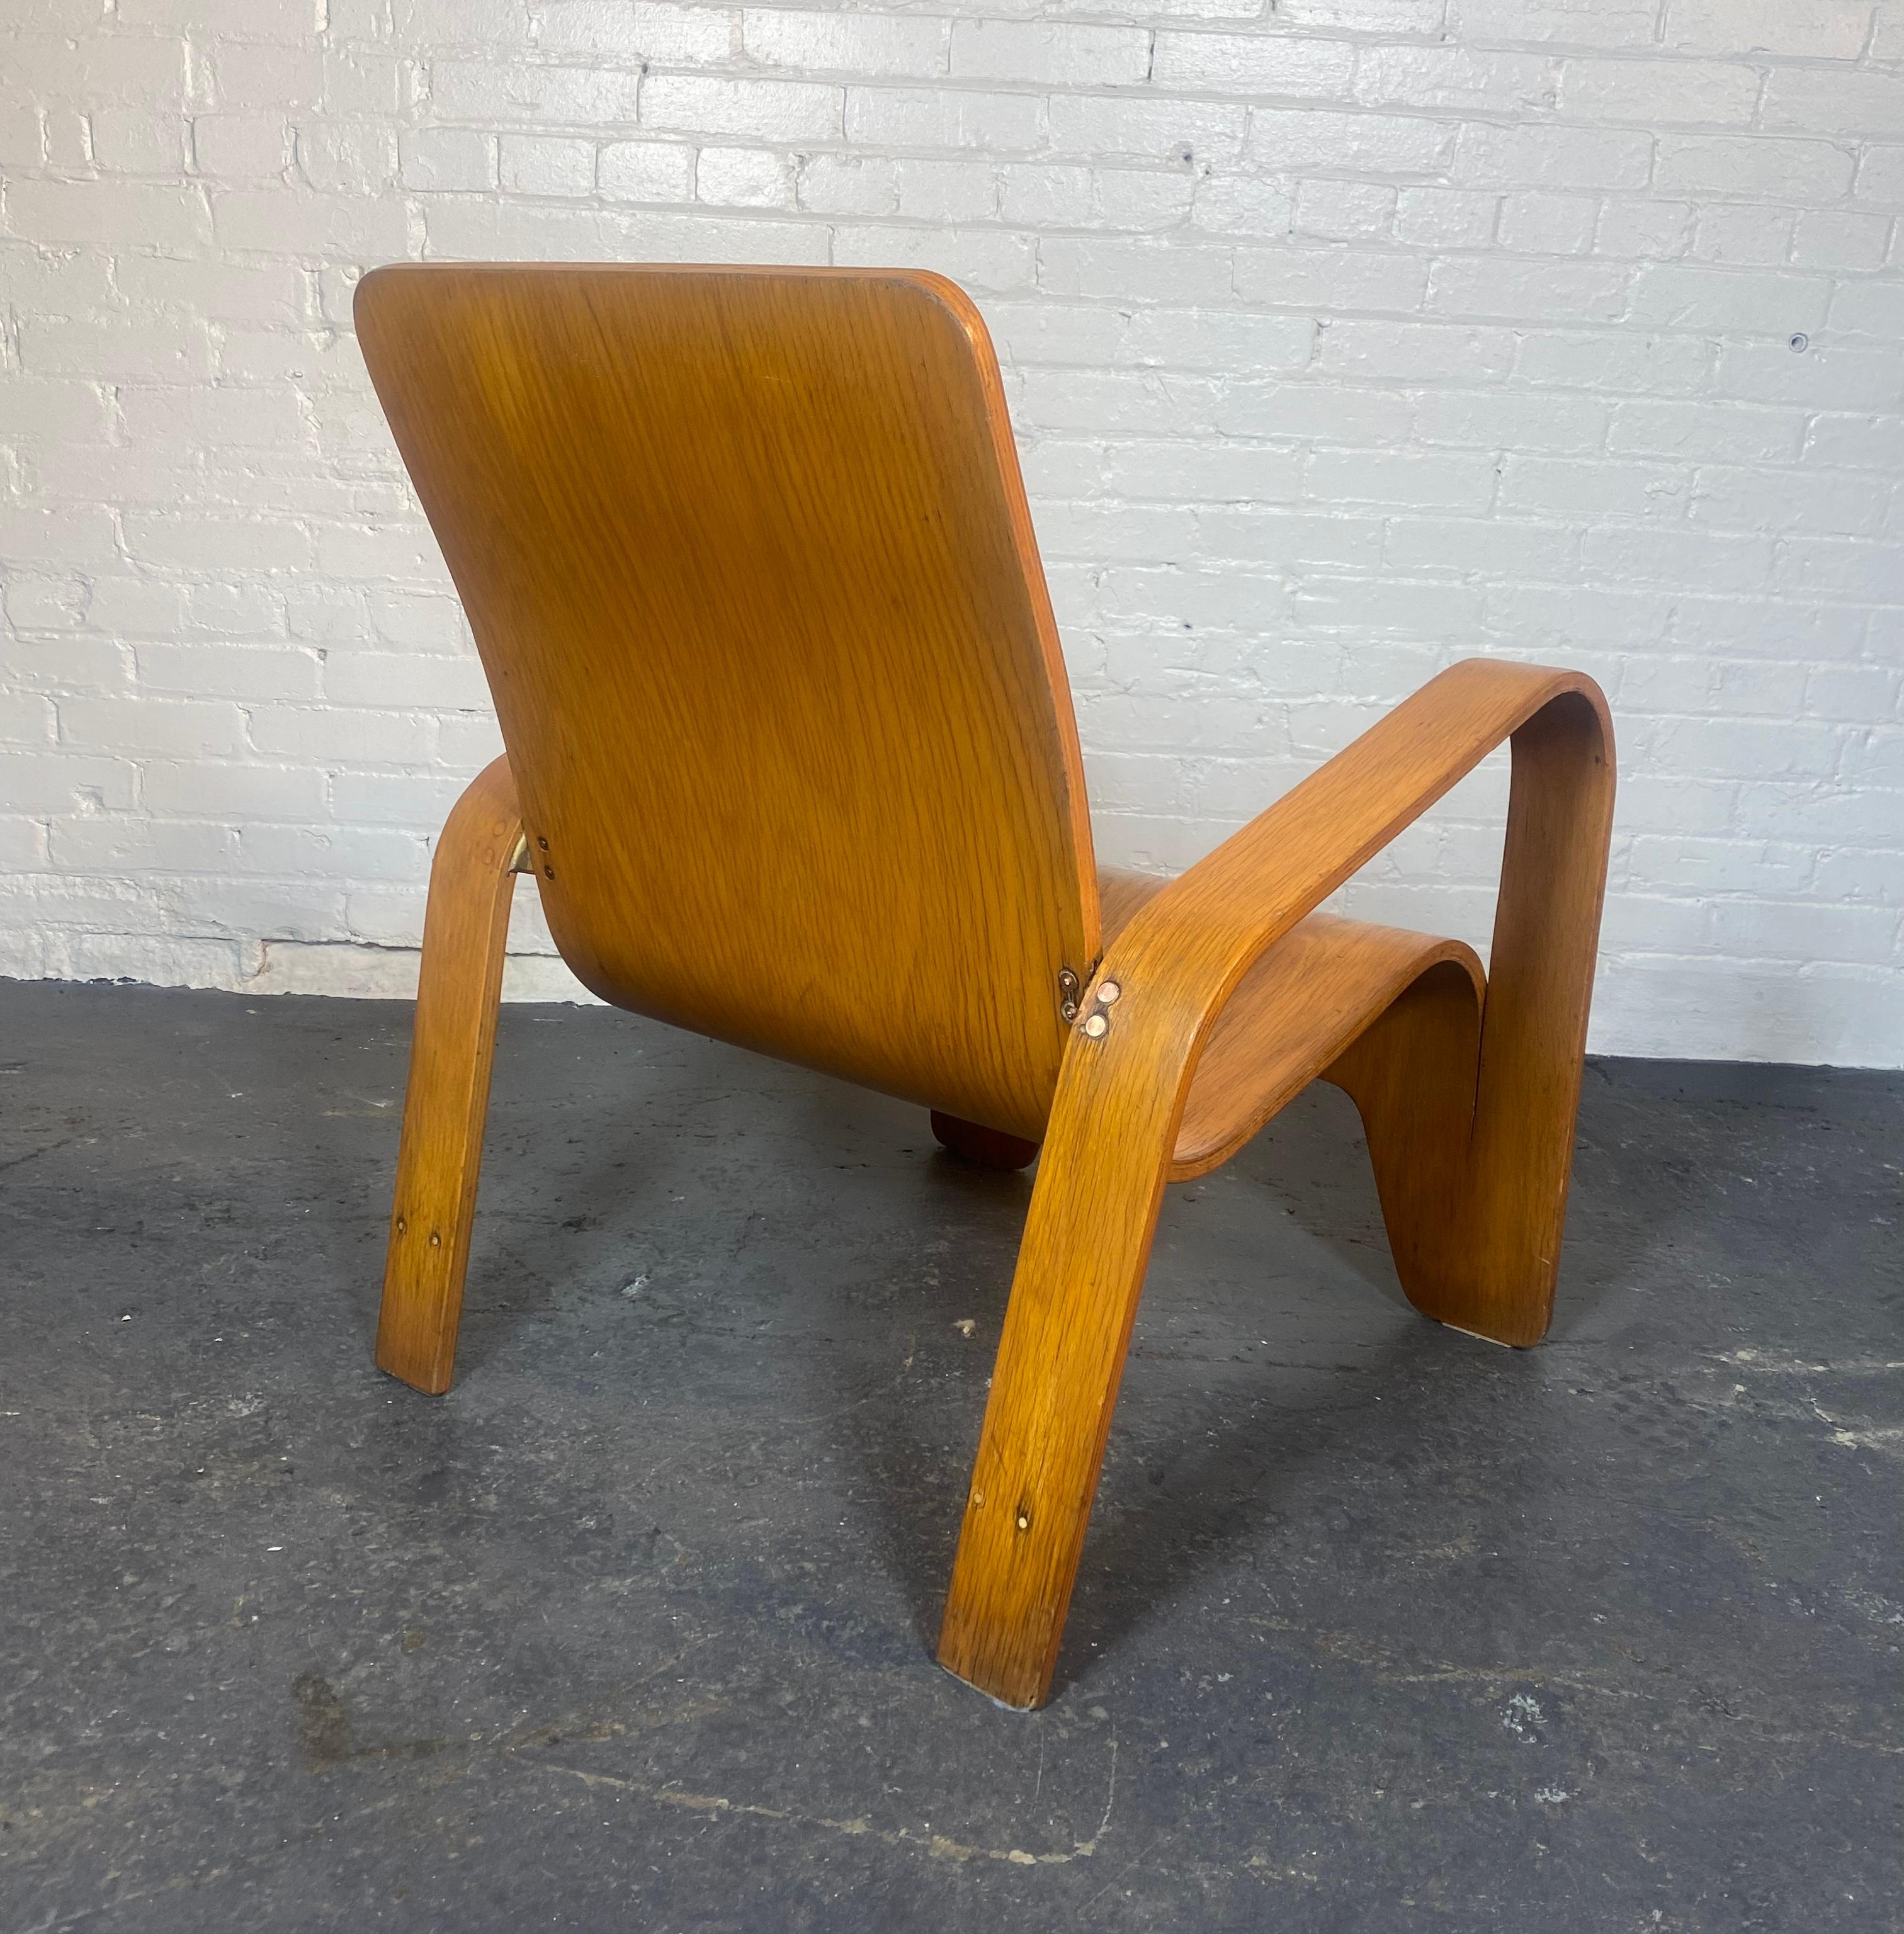 LaWo1 Molded Plywood Lounge Chair by Han Pieck for Lawo Ommen/ Netherlands 1945 In Good Condition For Sale In Buffalo, NY